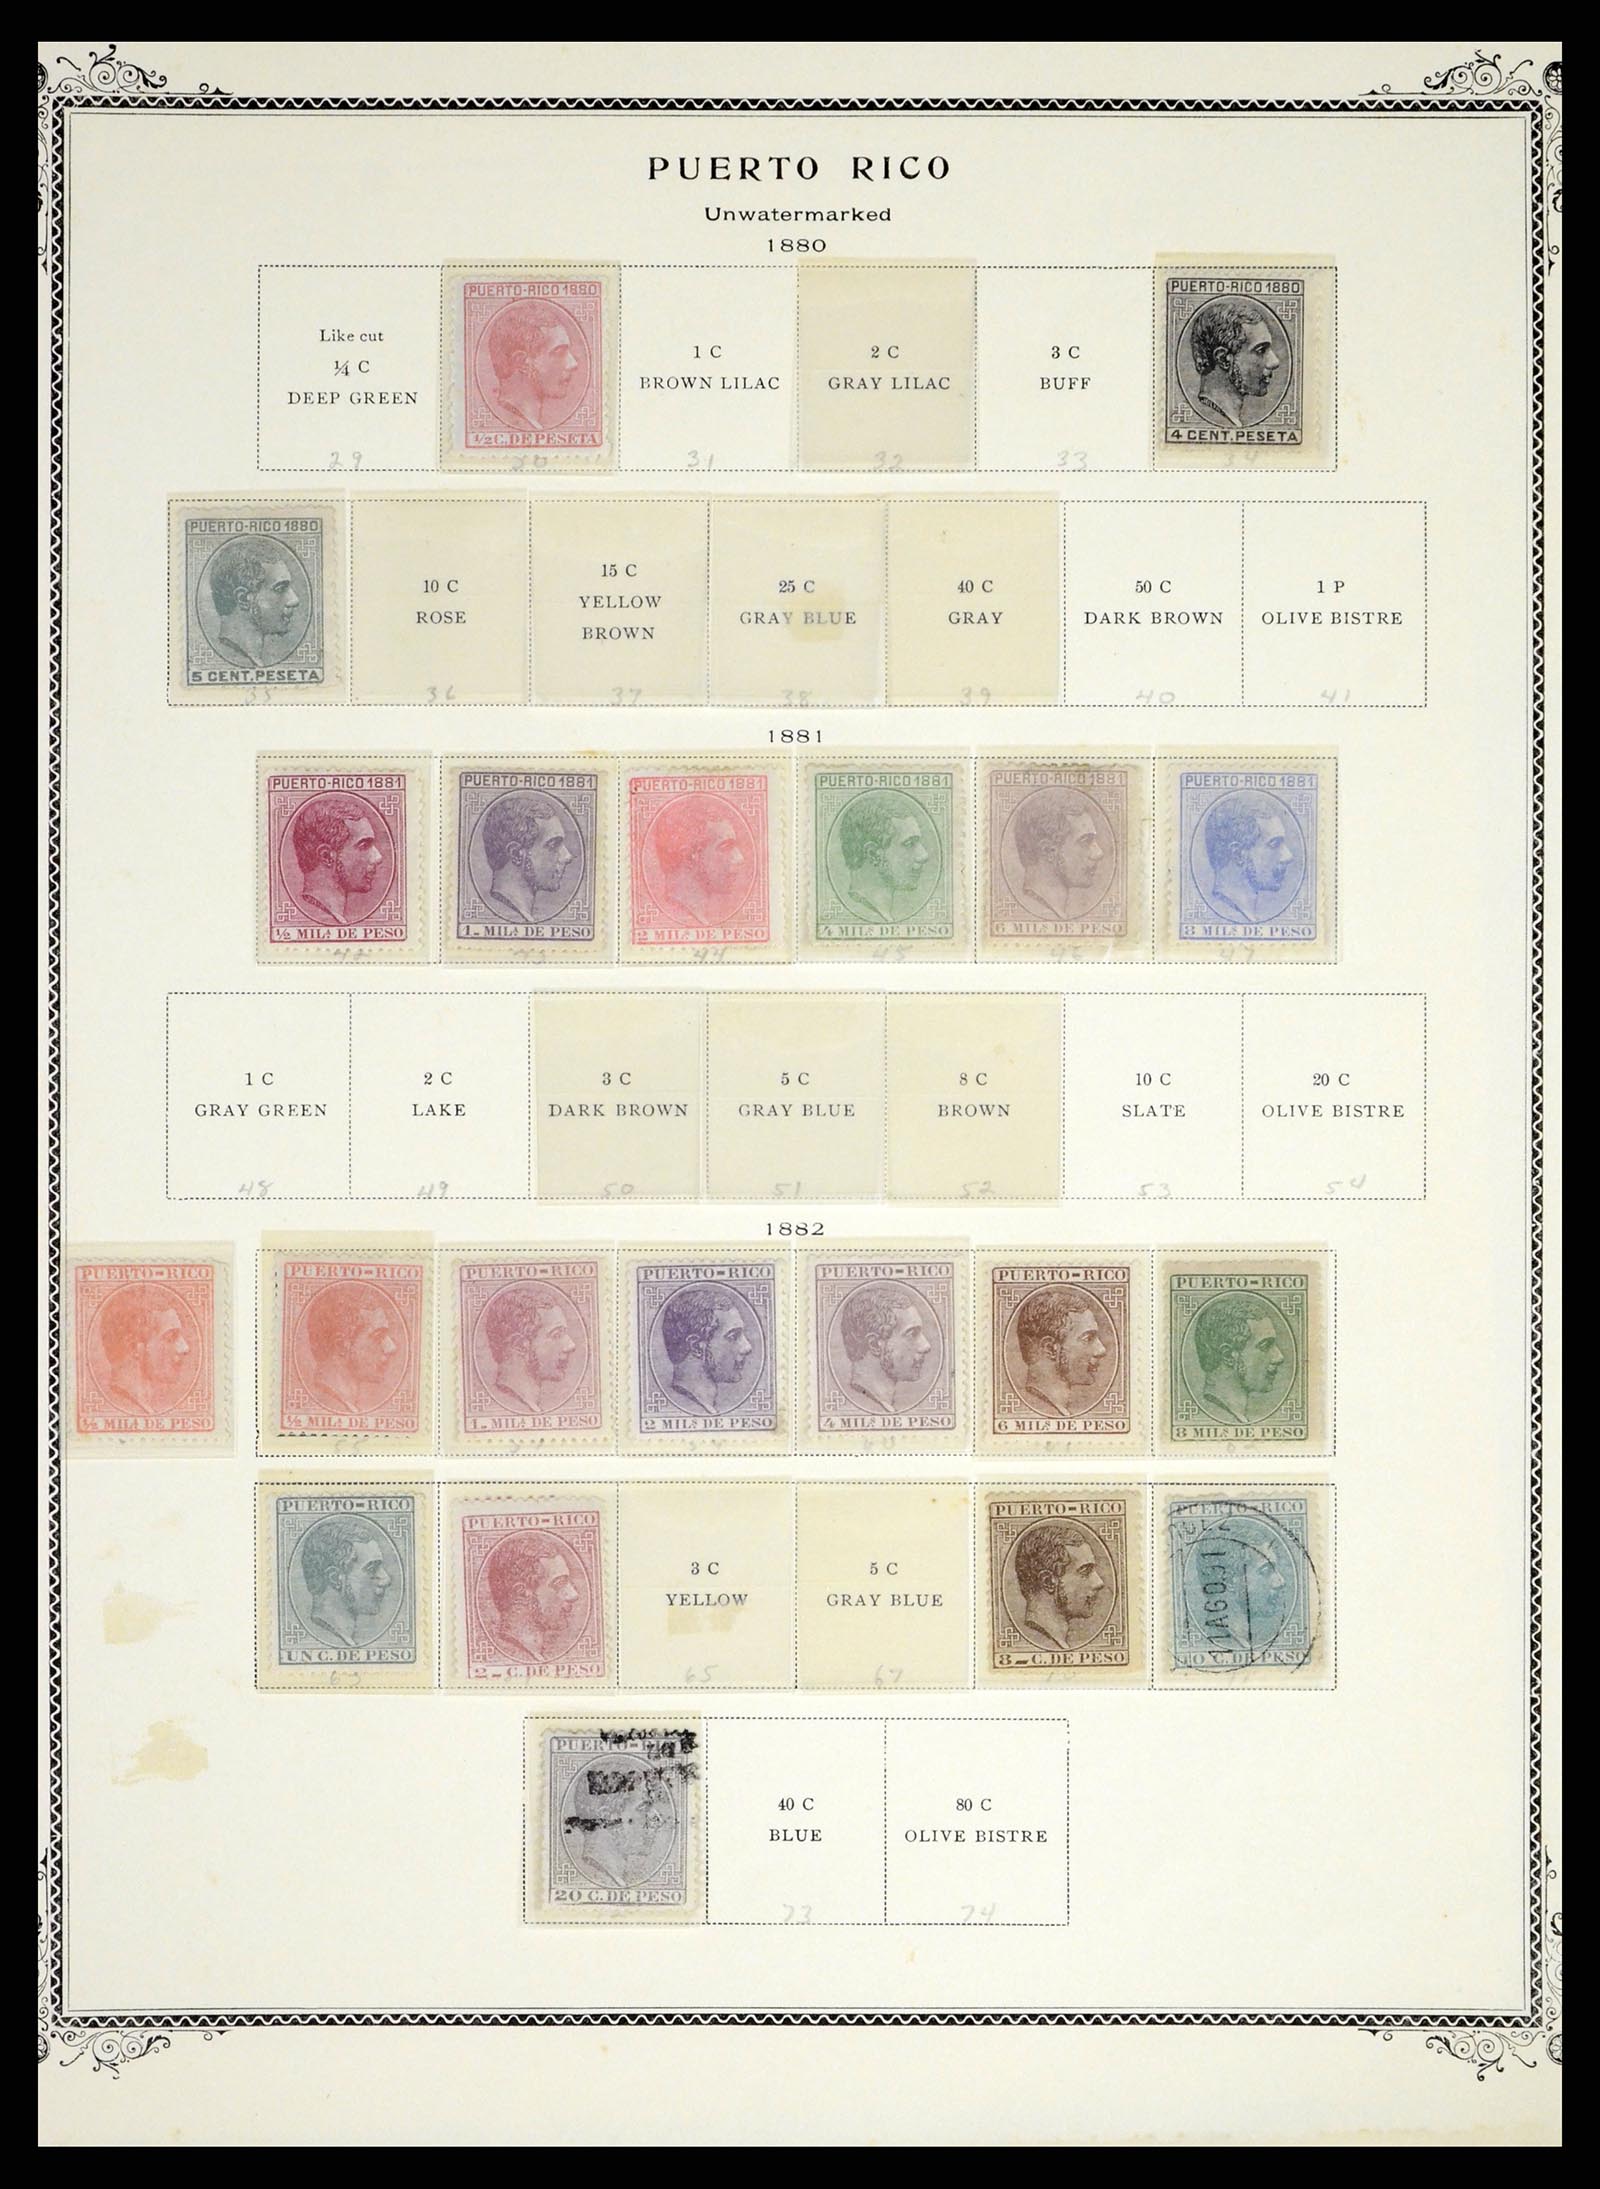 38191 0035 - Stamp collection 38191 Puerto Rico 1855-1900.